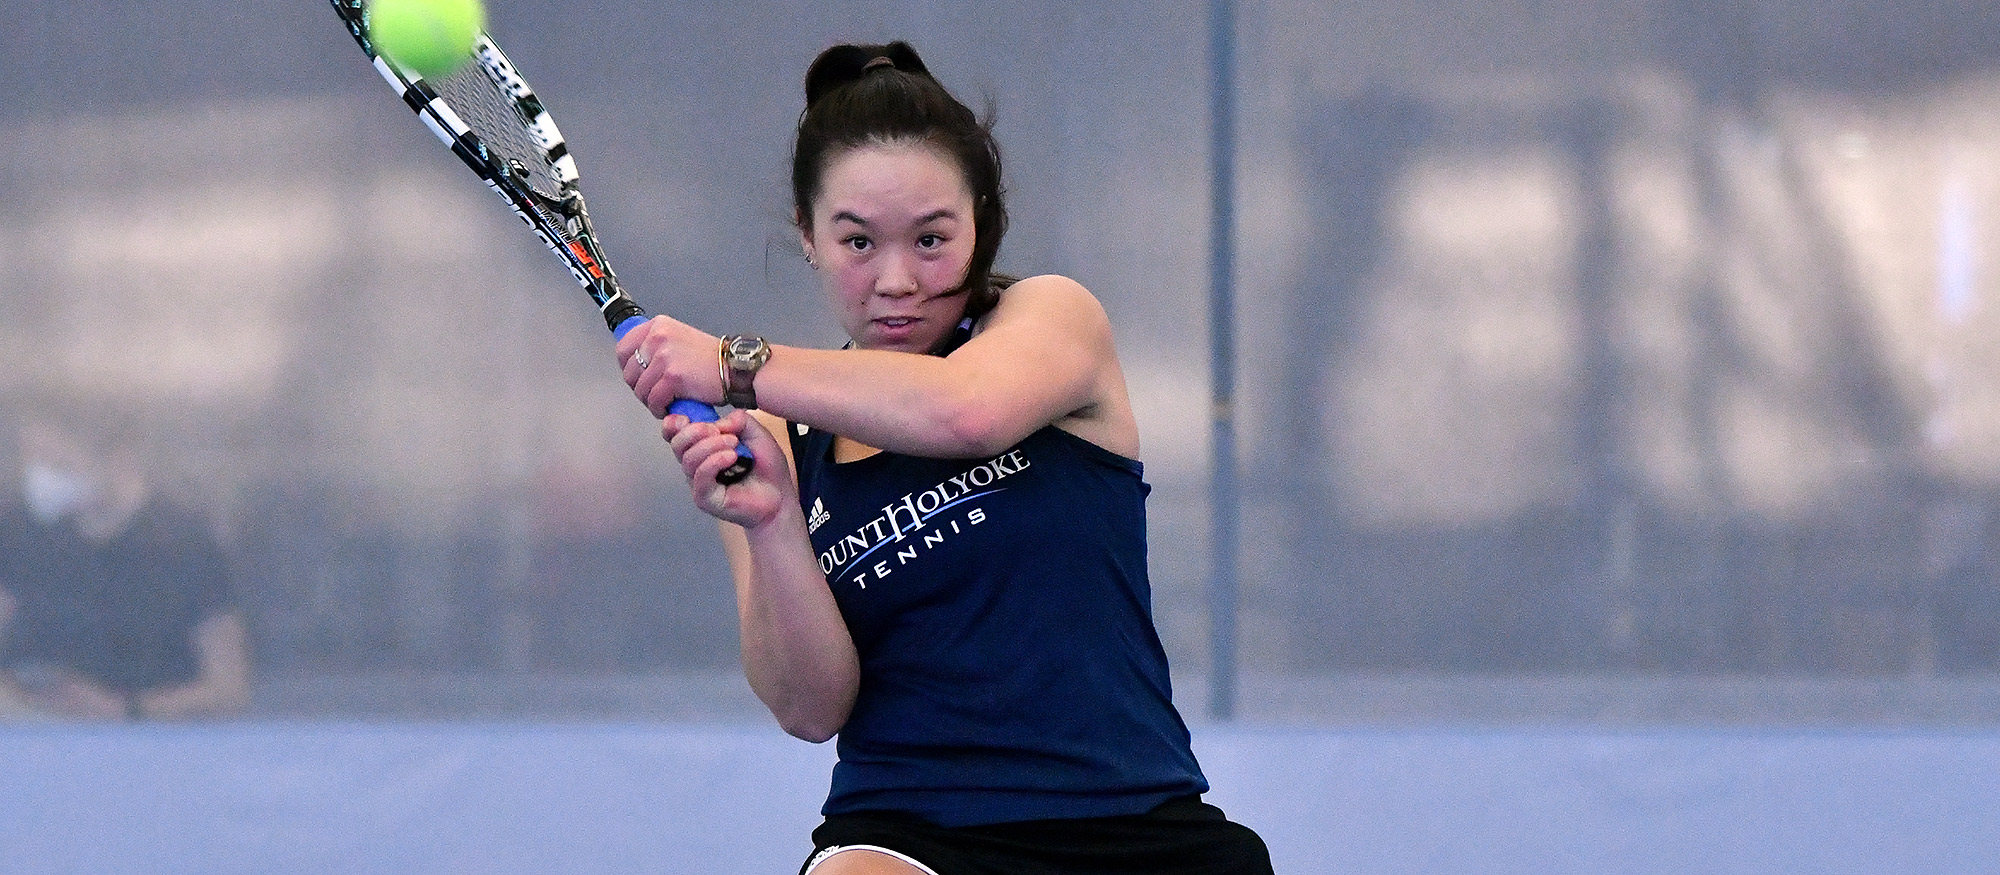 Sophomore captain Annika Chai won at both No. 1 doubles and No. 1 singles in Mount Holyoke's 6-3 loss at the College of the Holy Cross on Sept. 15, 2022. (RJB Sports file photo)